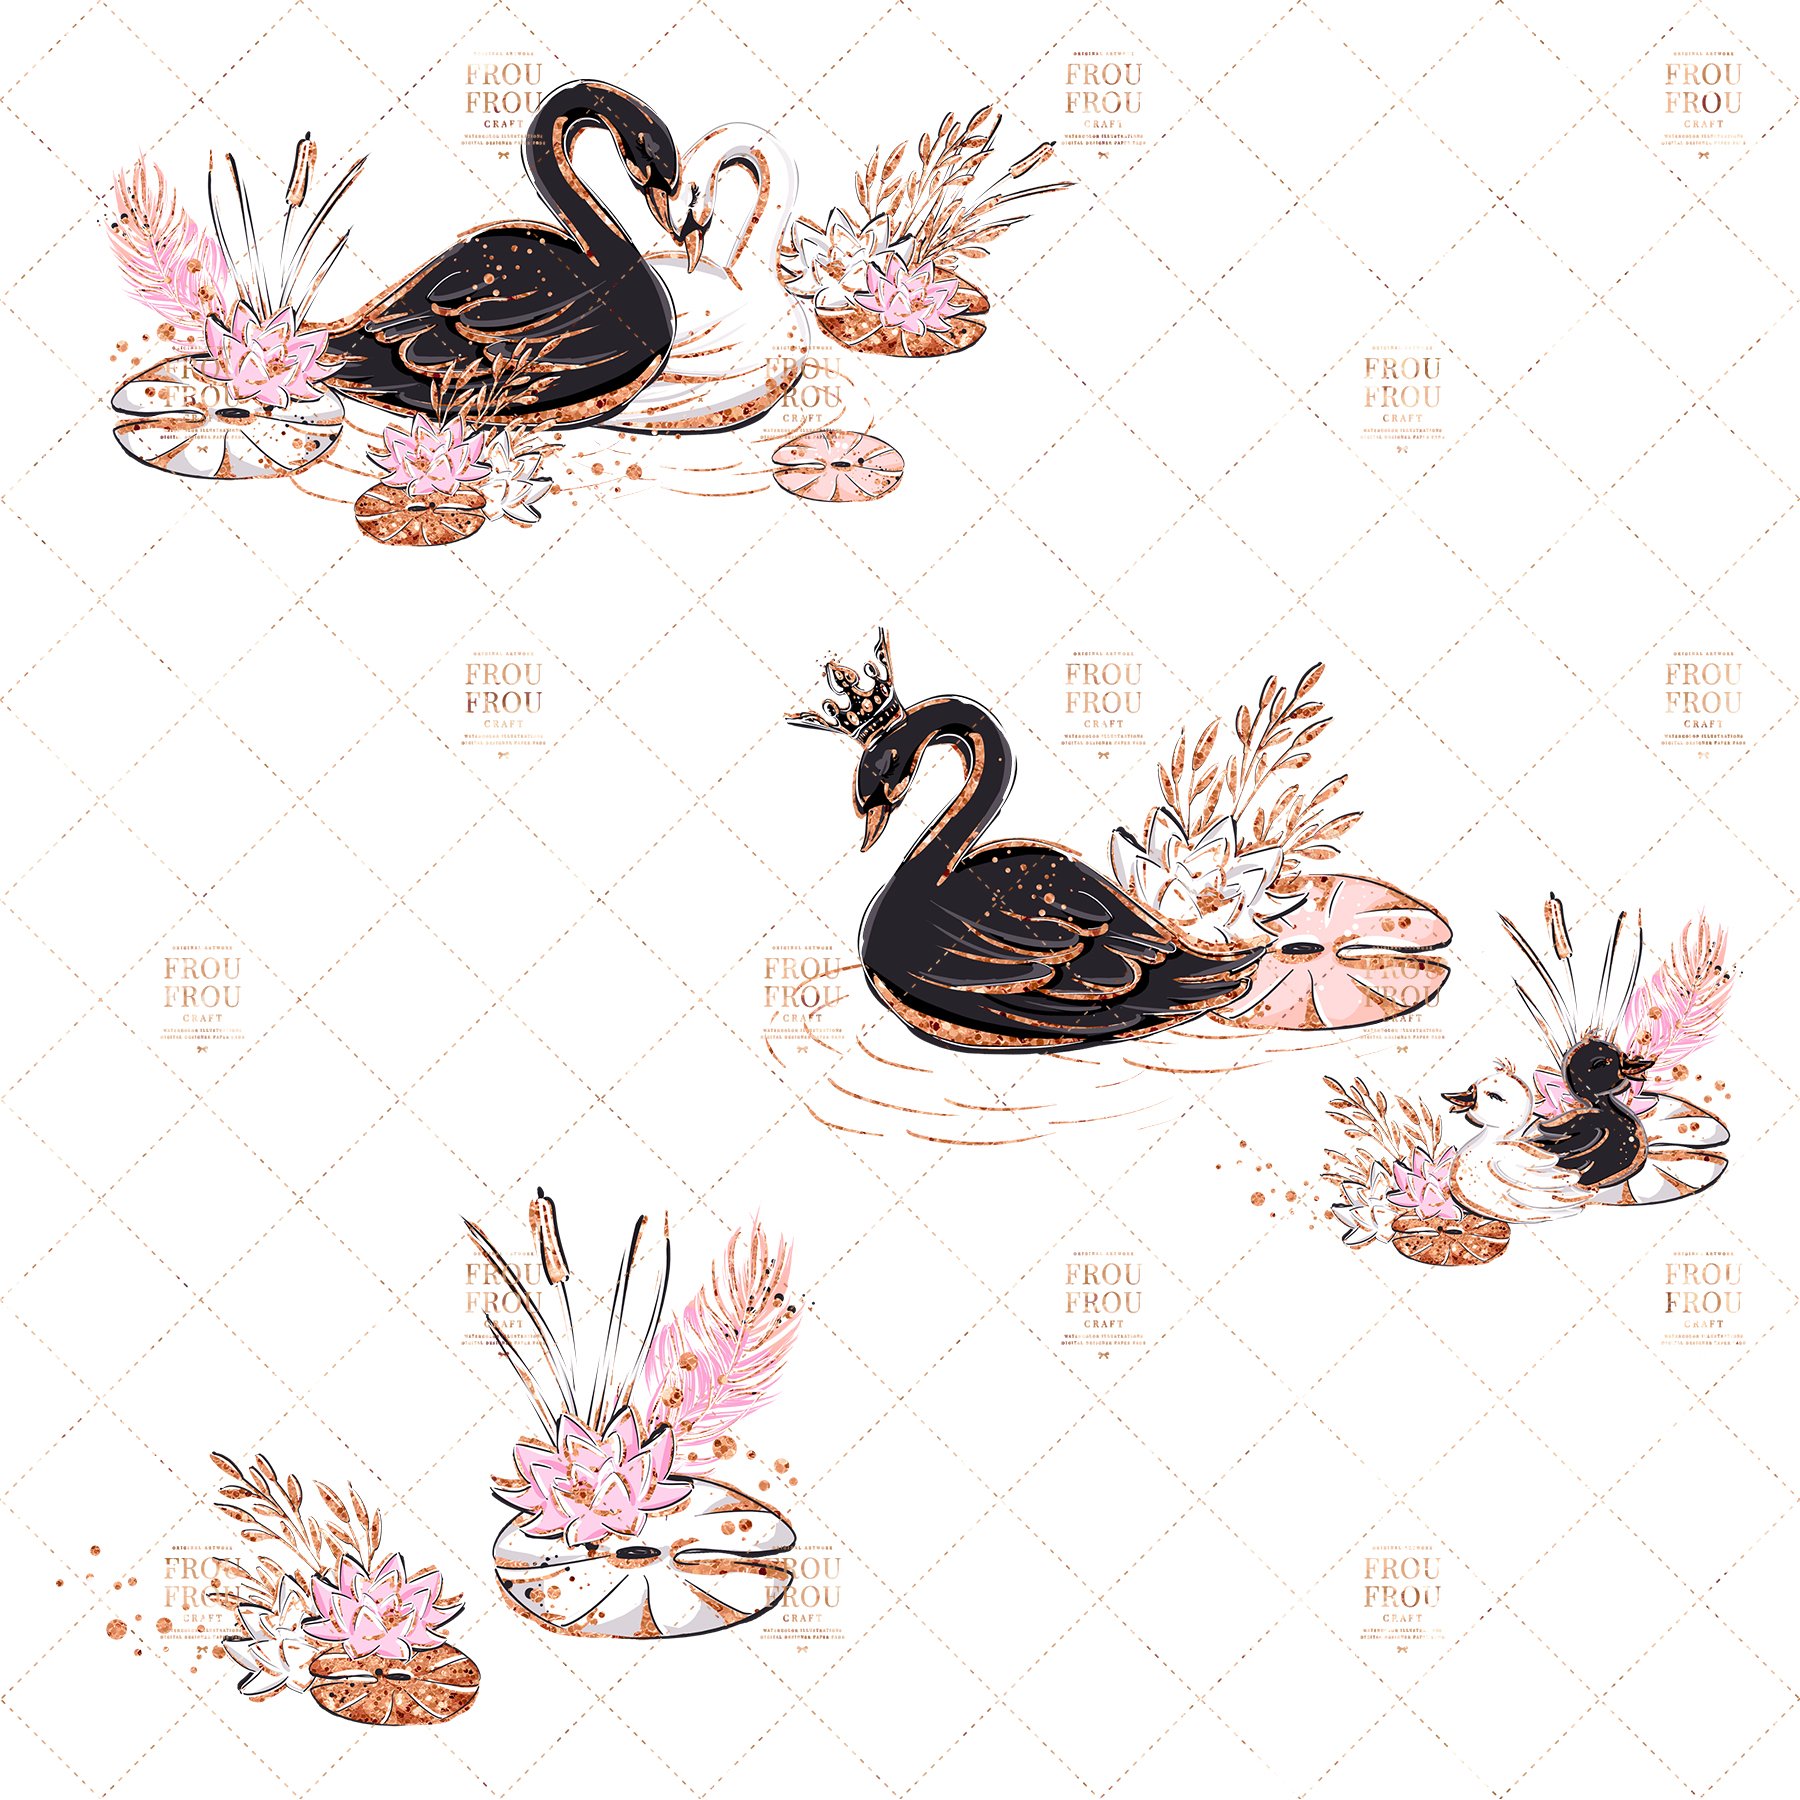 Two black swans with pastel elements.